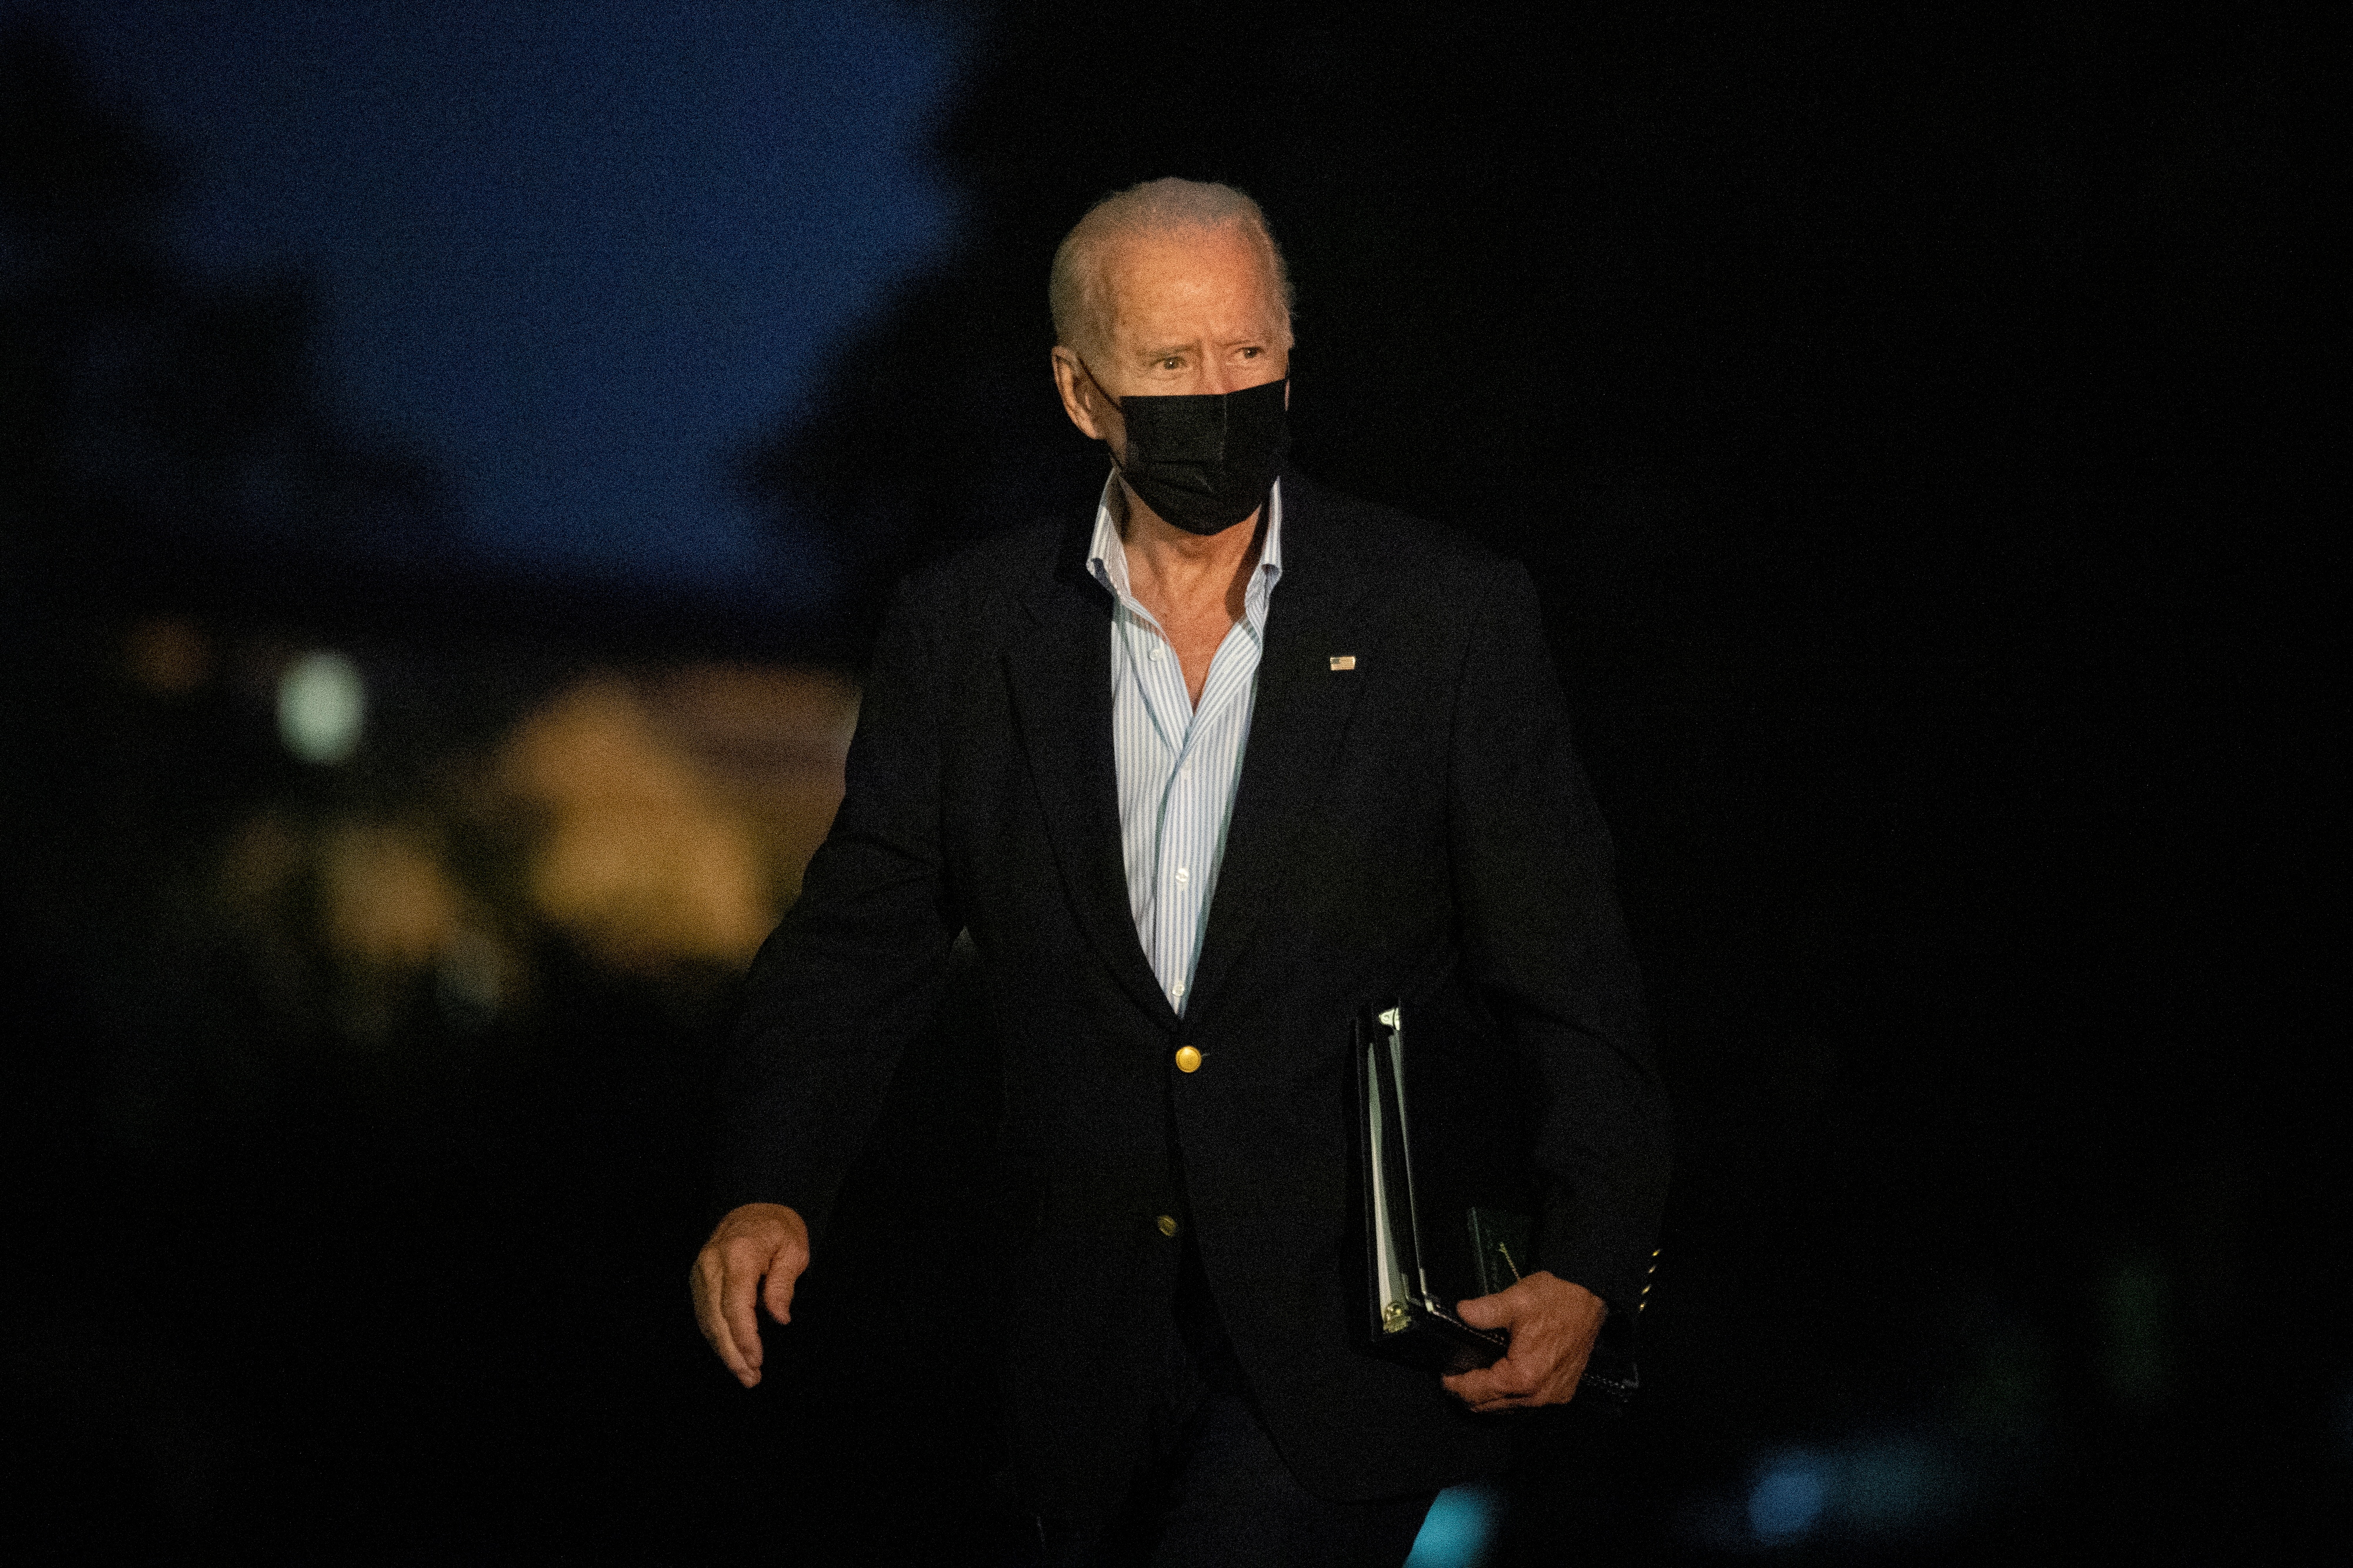 President Biden arrives on the South Lawn at the White House